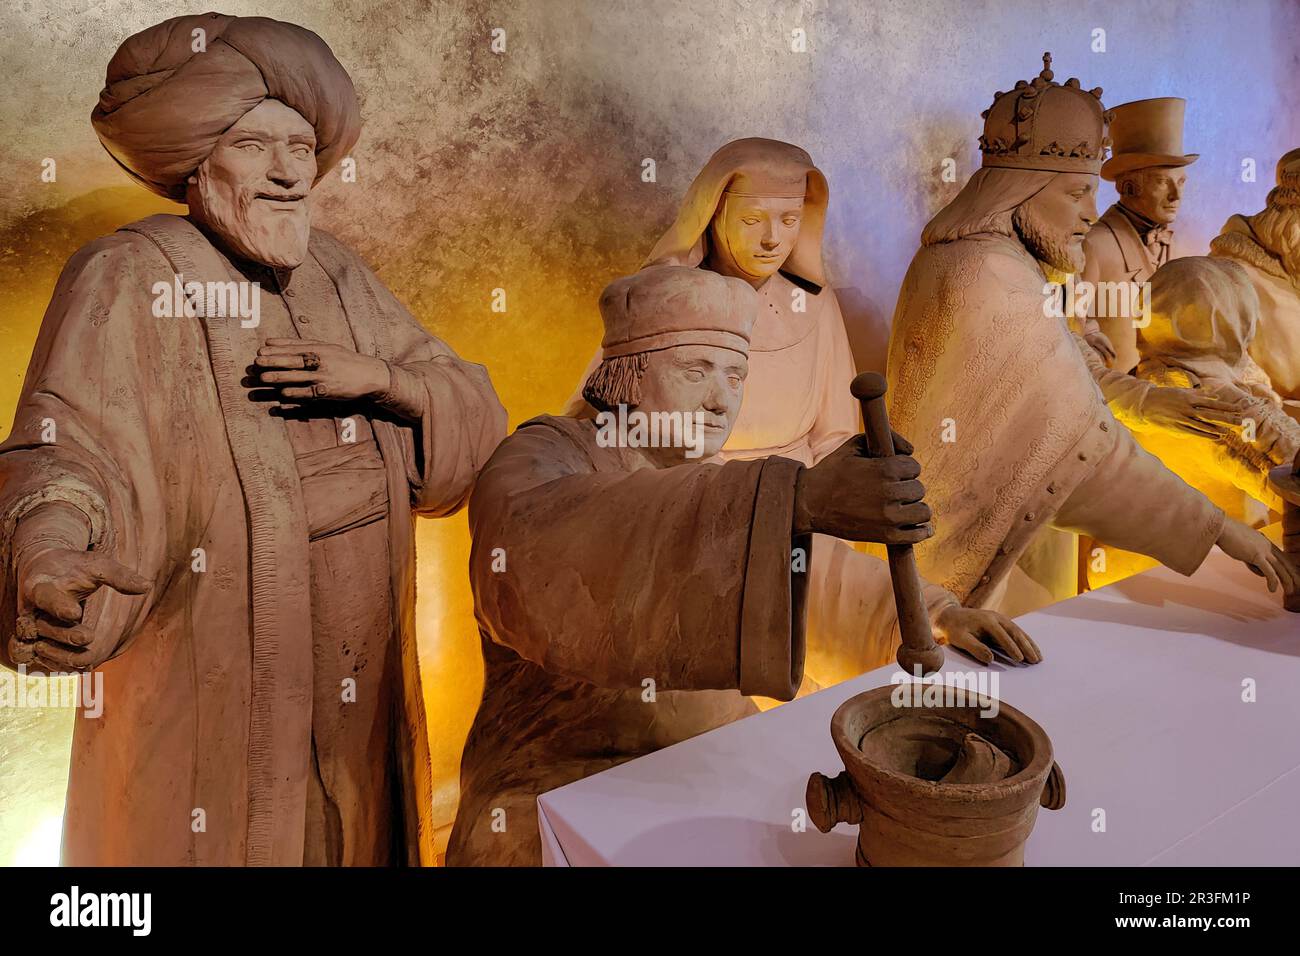 Historical figures made of marzipan, Niederegger Marzipan Museum, Luebeck, Germany, Europe Stock Photo